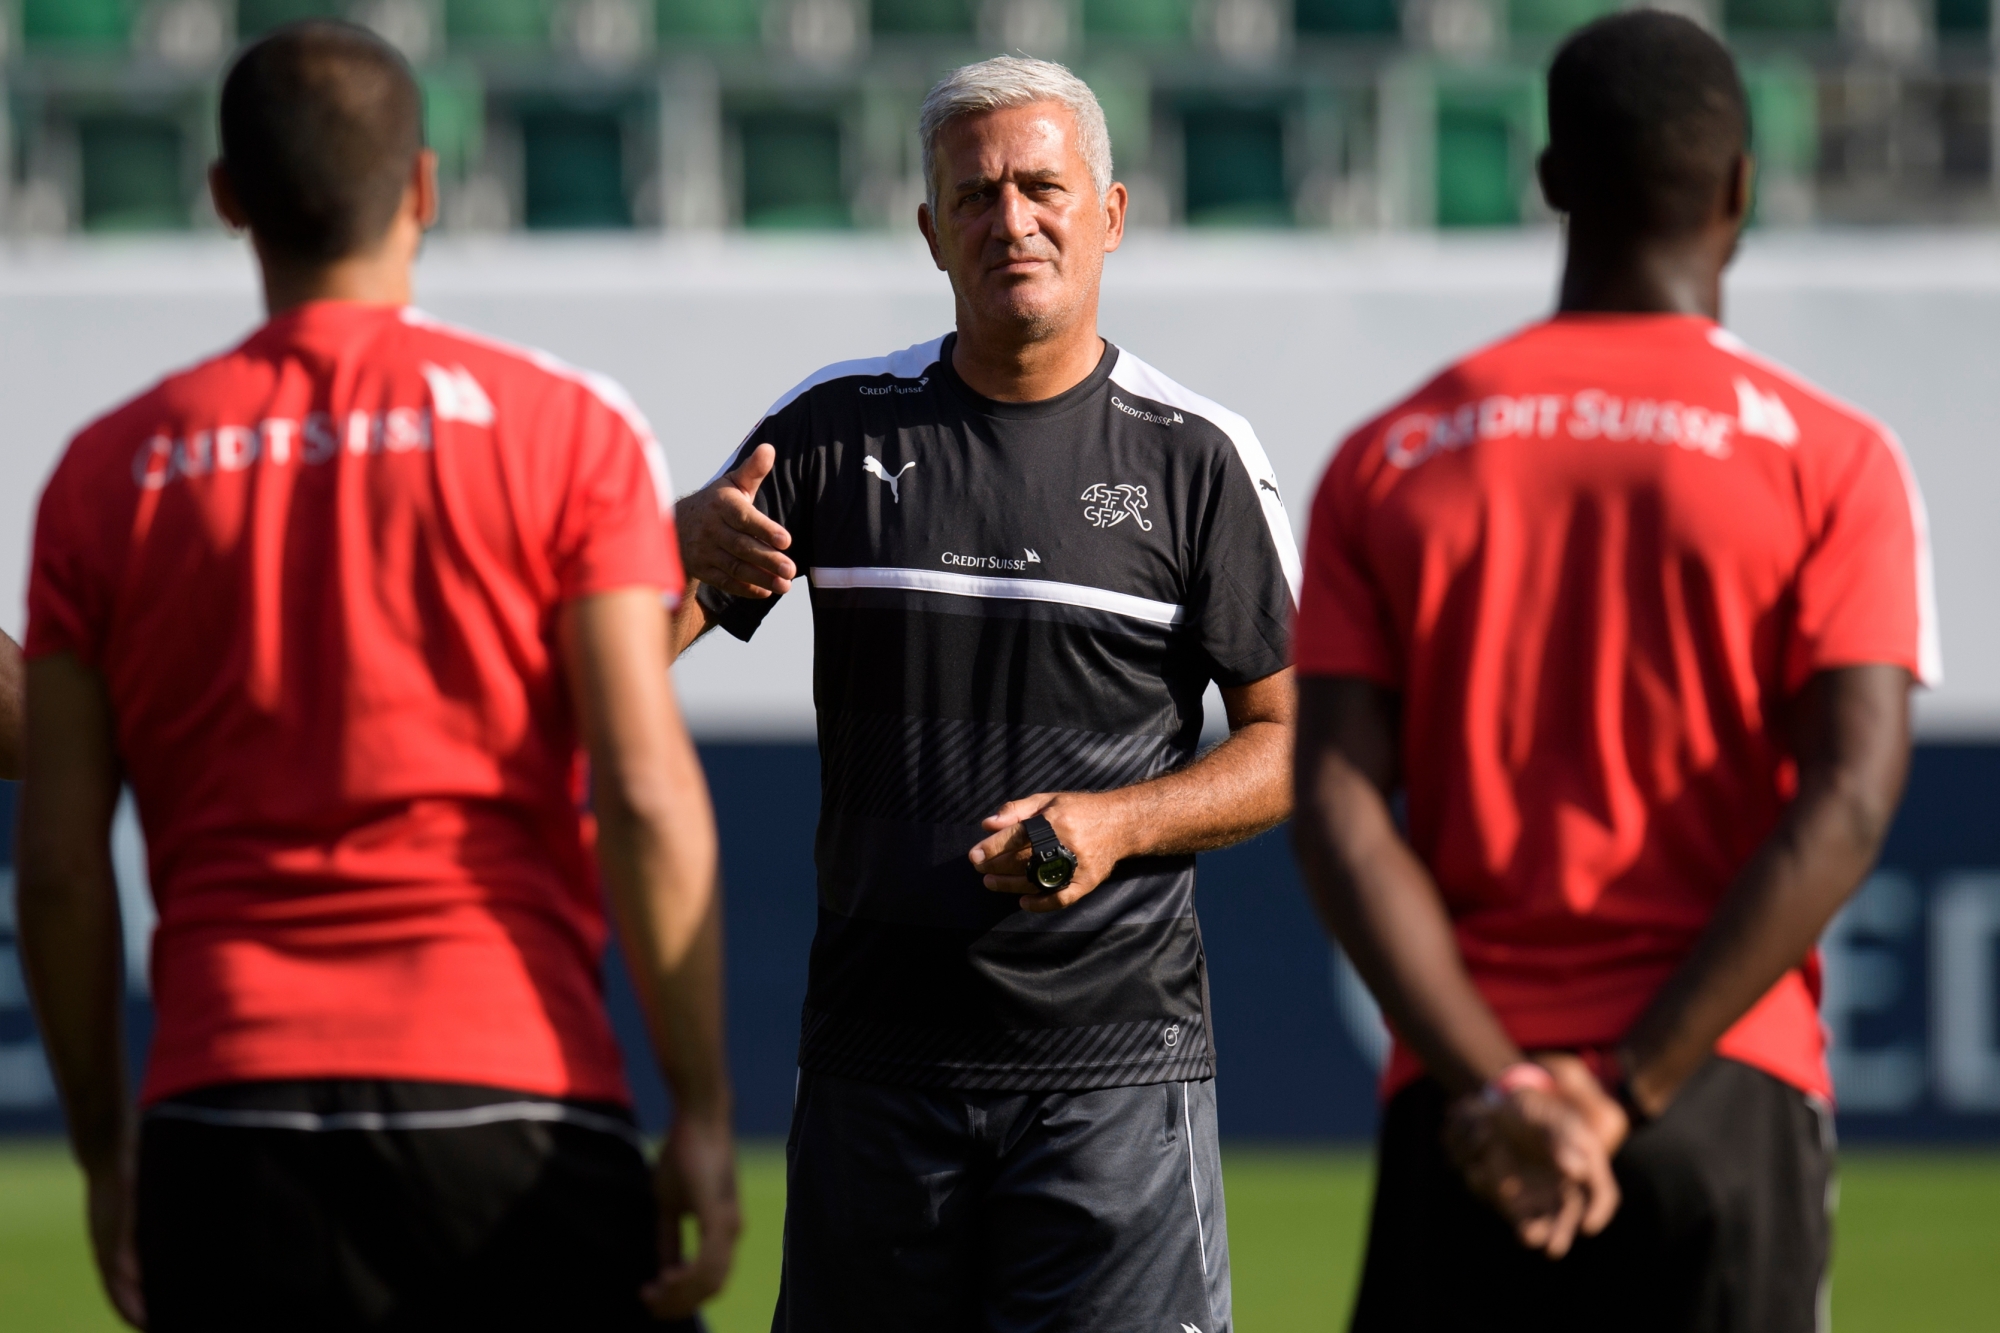 Swiss head coach Vladimir Petkovic is pictured during a training session prior to the 2018 Fifa World Cup group B qualification soccer match between Switzerland and Andorra, on Wednesday, August 30, 2017, in kybunpark stadium in St. Gallen, Switzerland. Switzerland will face Andorra tomorrow. (KEYSTONE/Gian Ehrenzeller) SOCCER SWITZERLAND TRAINING